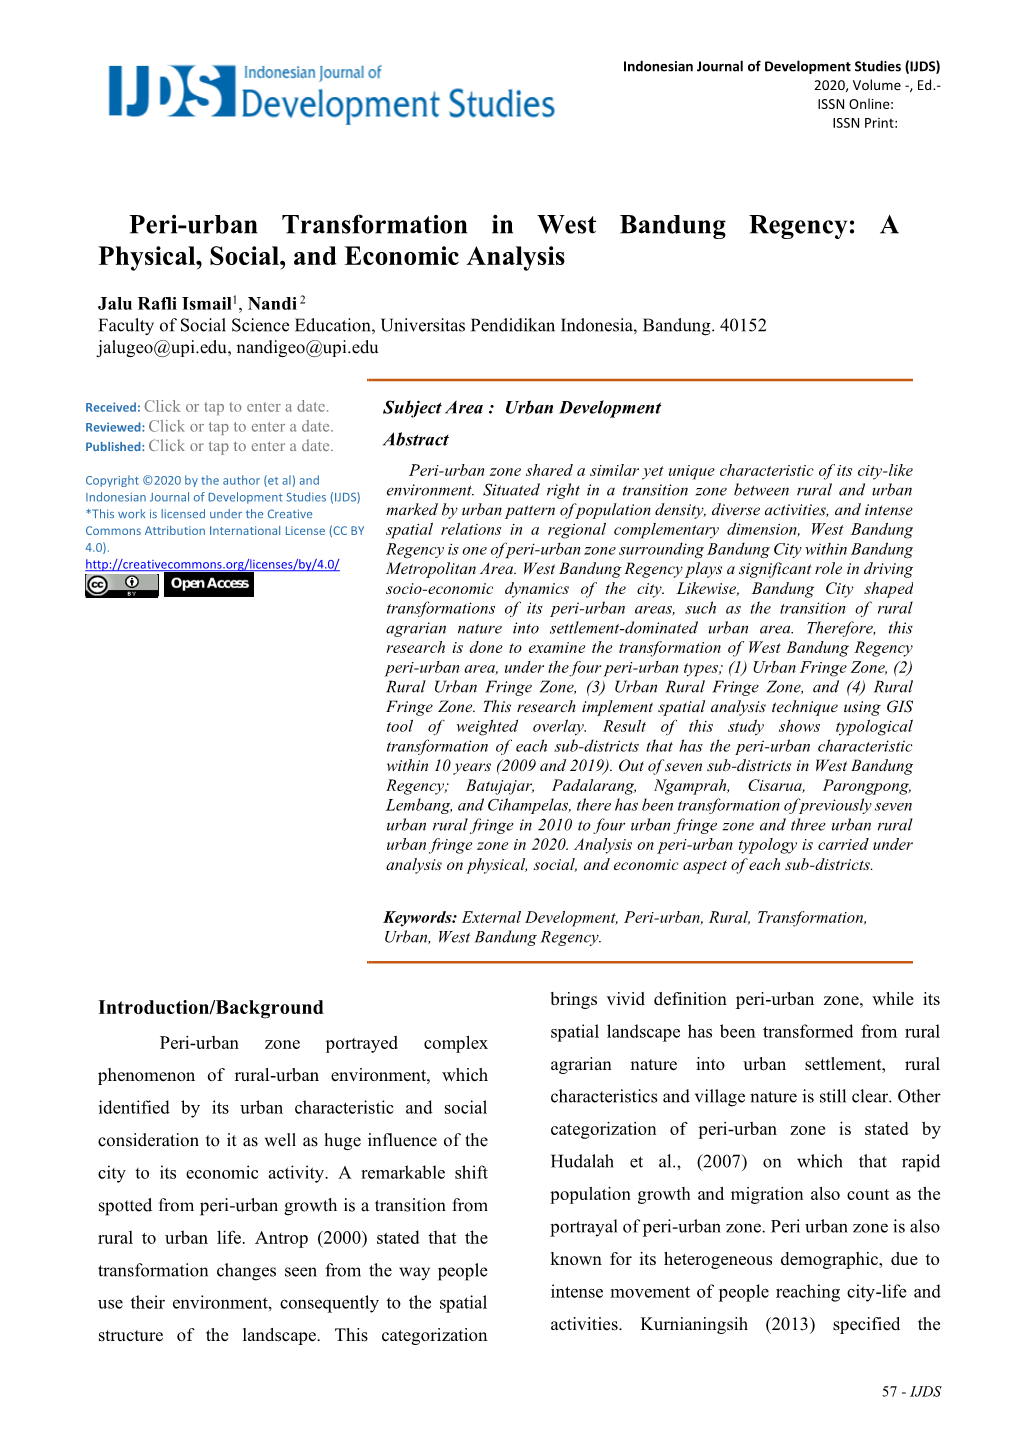 Peri-Urban Transformation in West Bandung Regency: a Physical, Social, and Economic Analysis